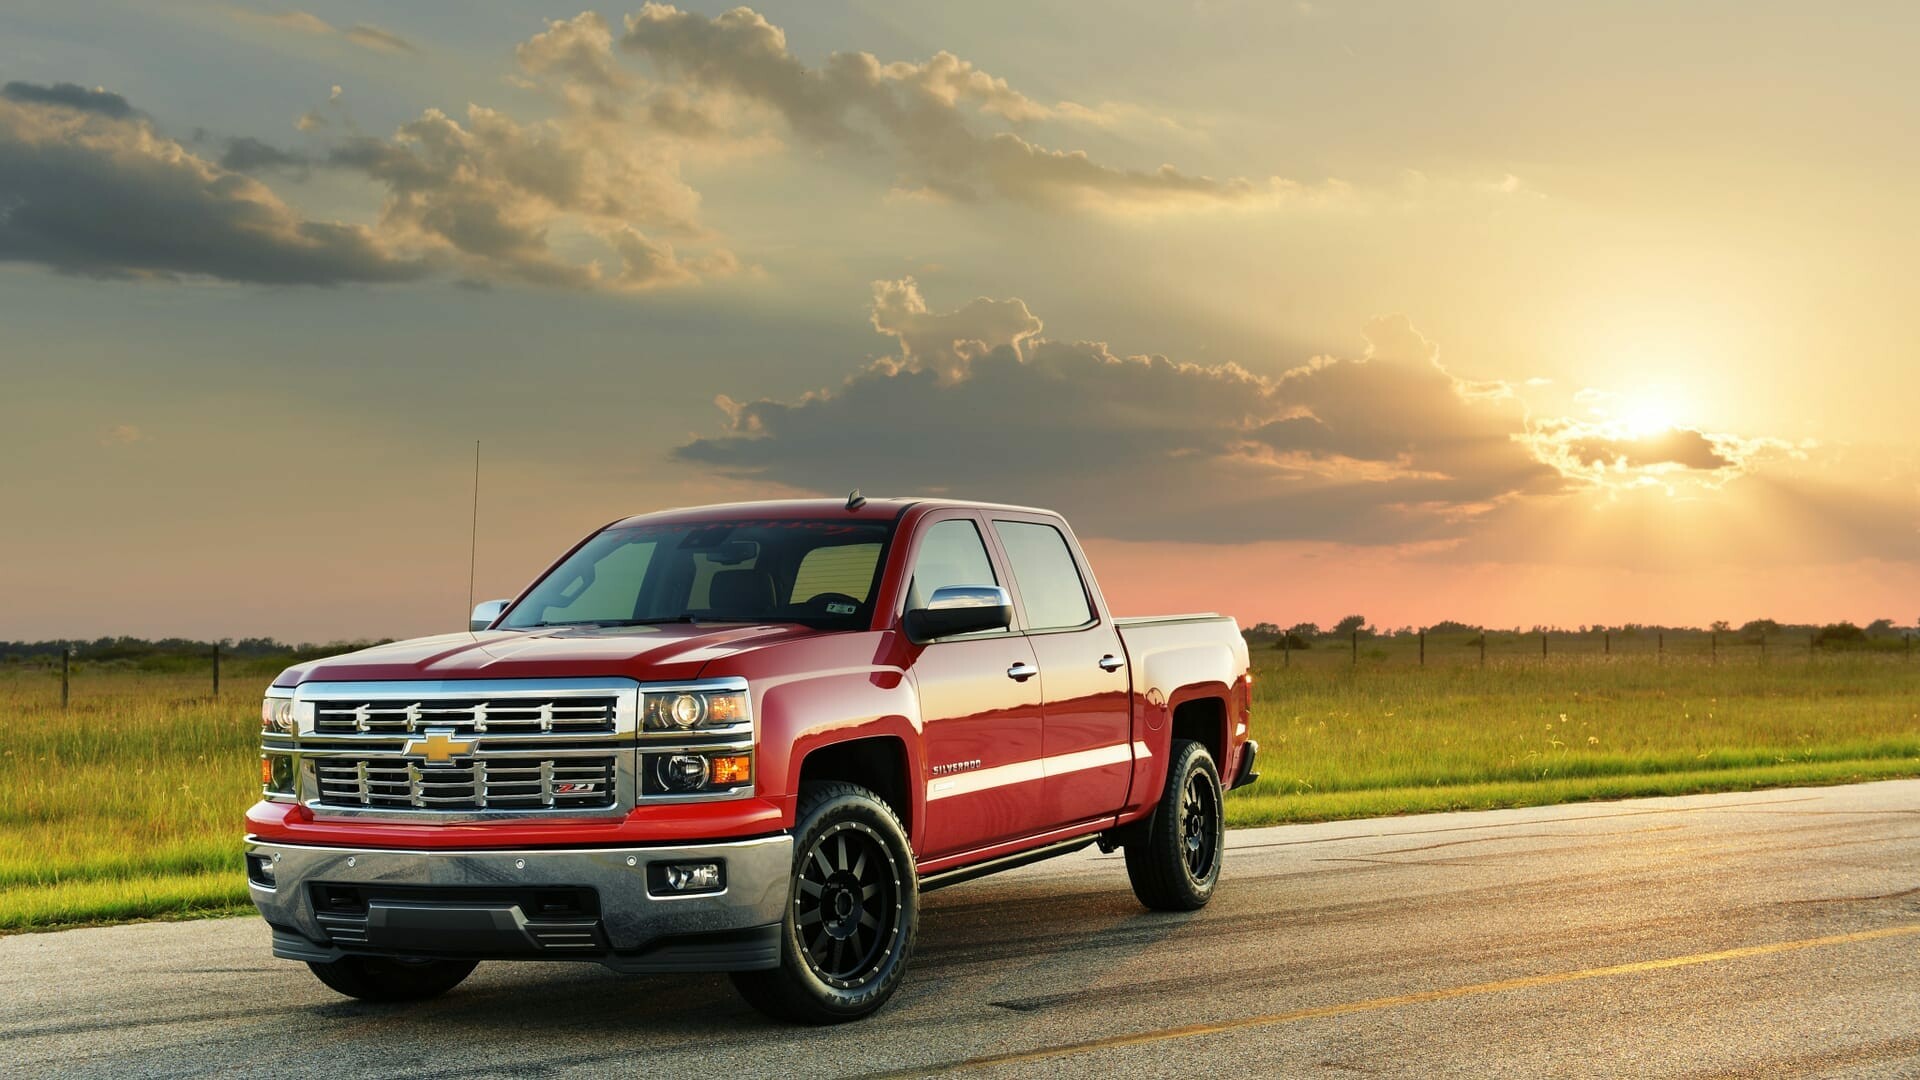 Chevrolet Silverado: A half-ton truck, Shares mechanical commonality with the GMC Sierra. 1920x1080 Full HD Background.